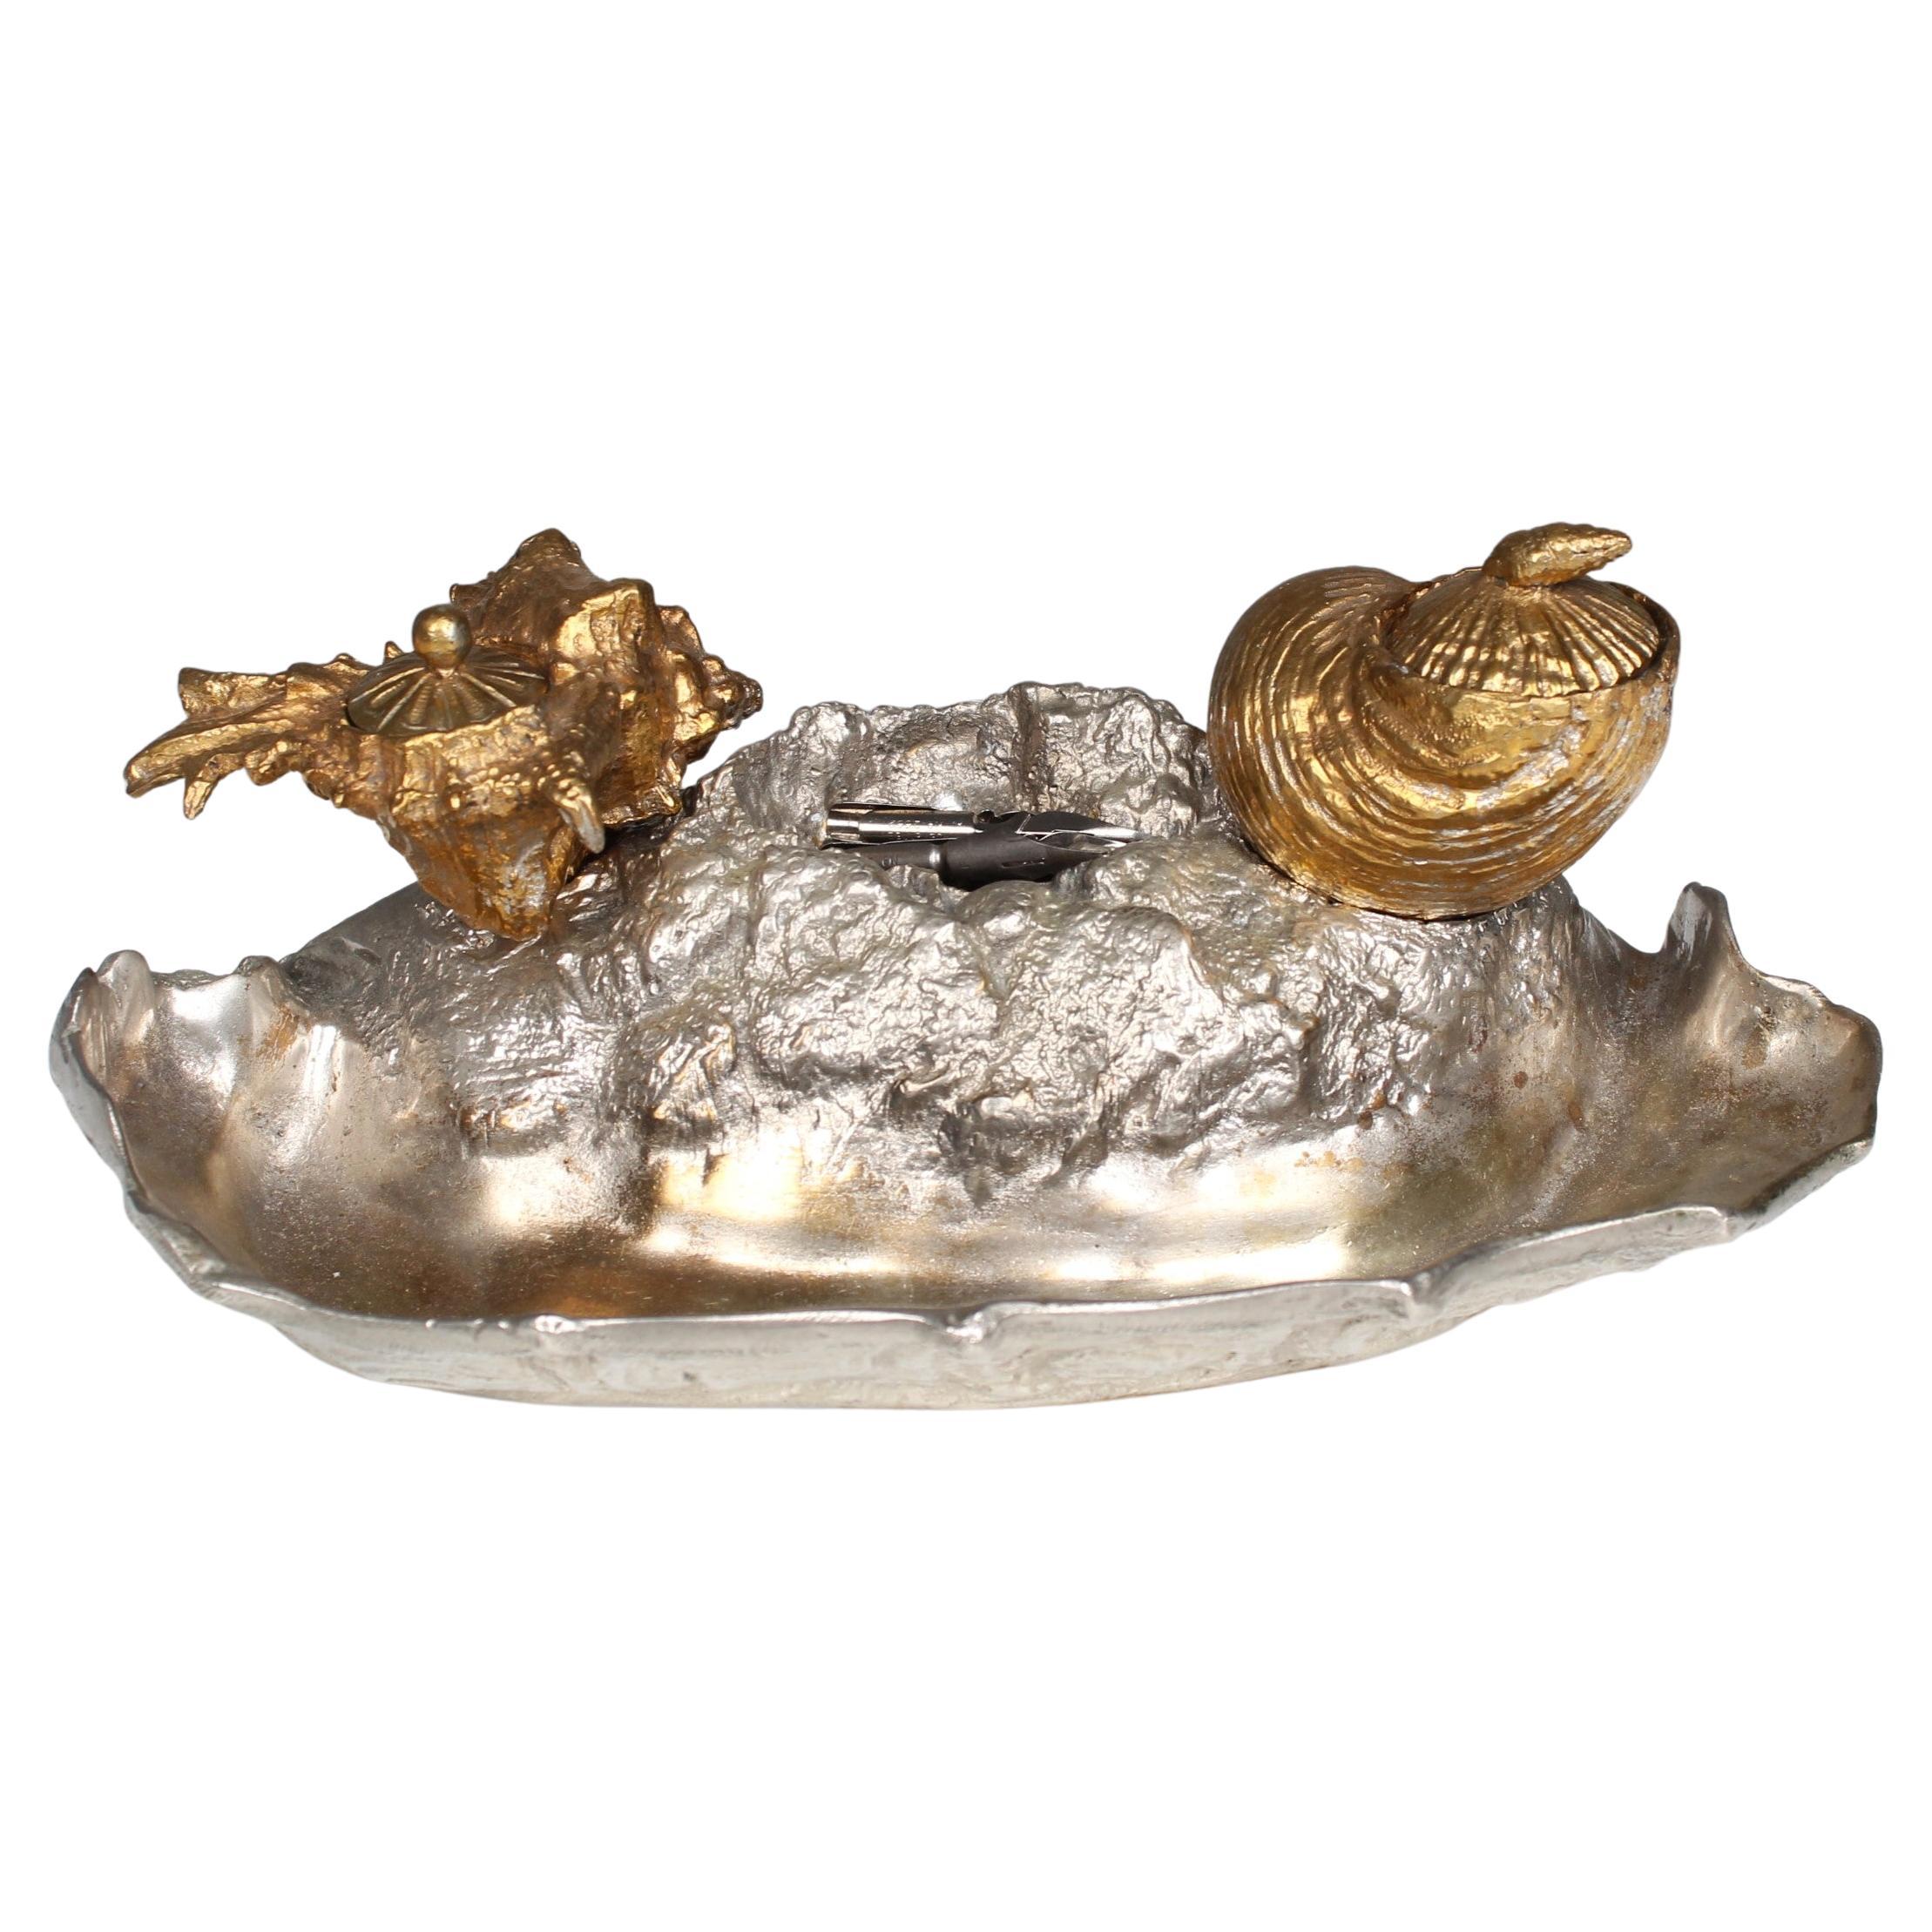 Antique Inkwell, Seashells, Gilded and Silvered, Bronze Dorée, Mid 19th Century